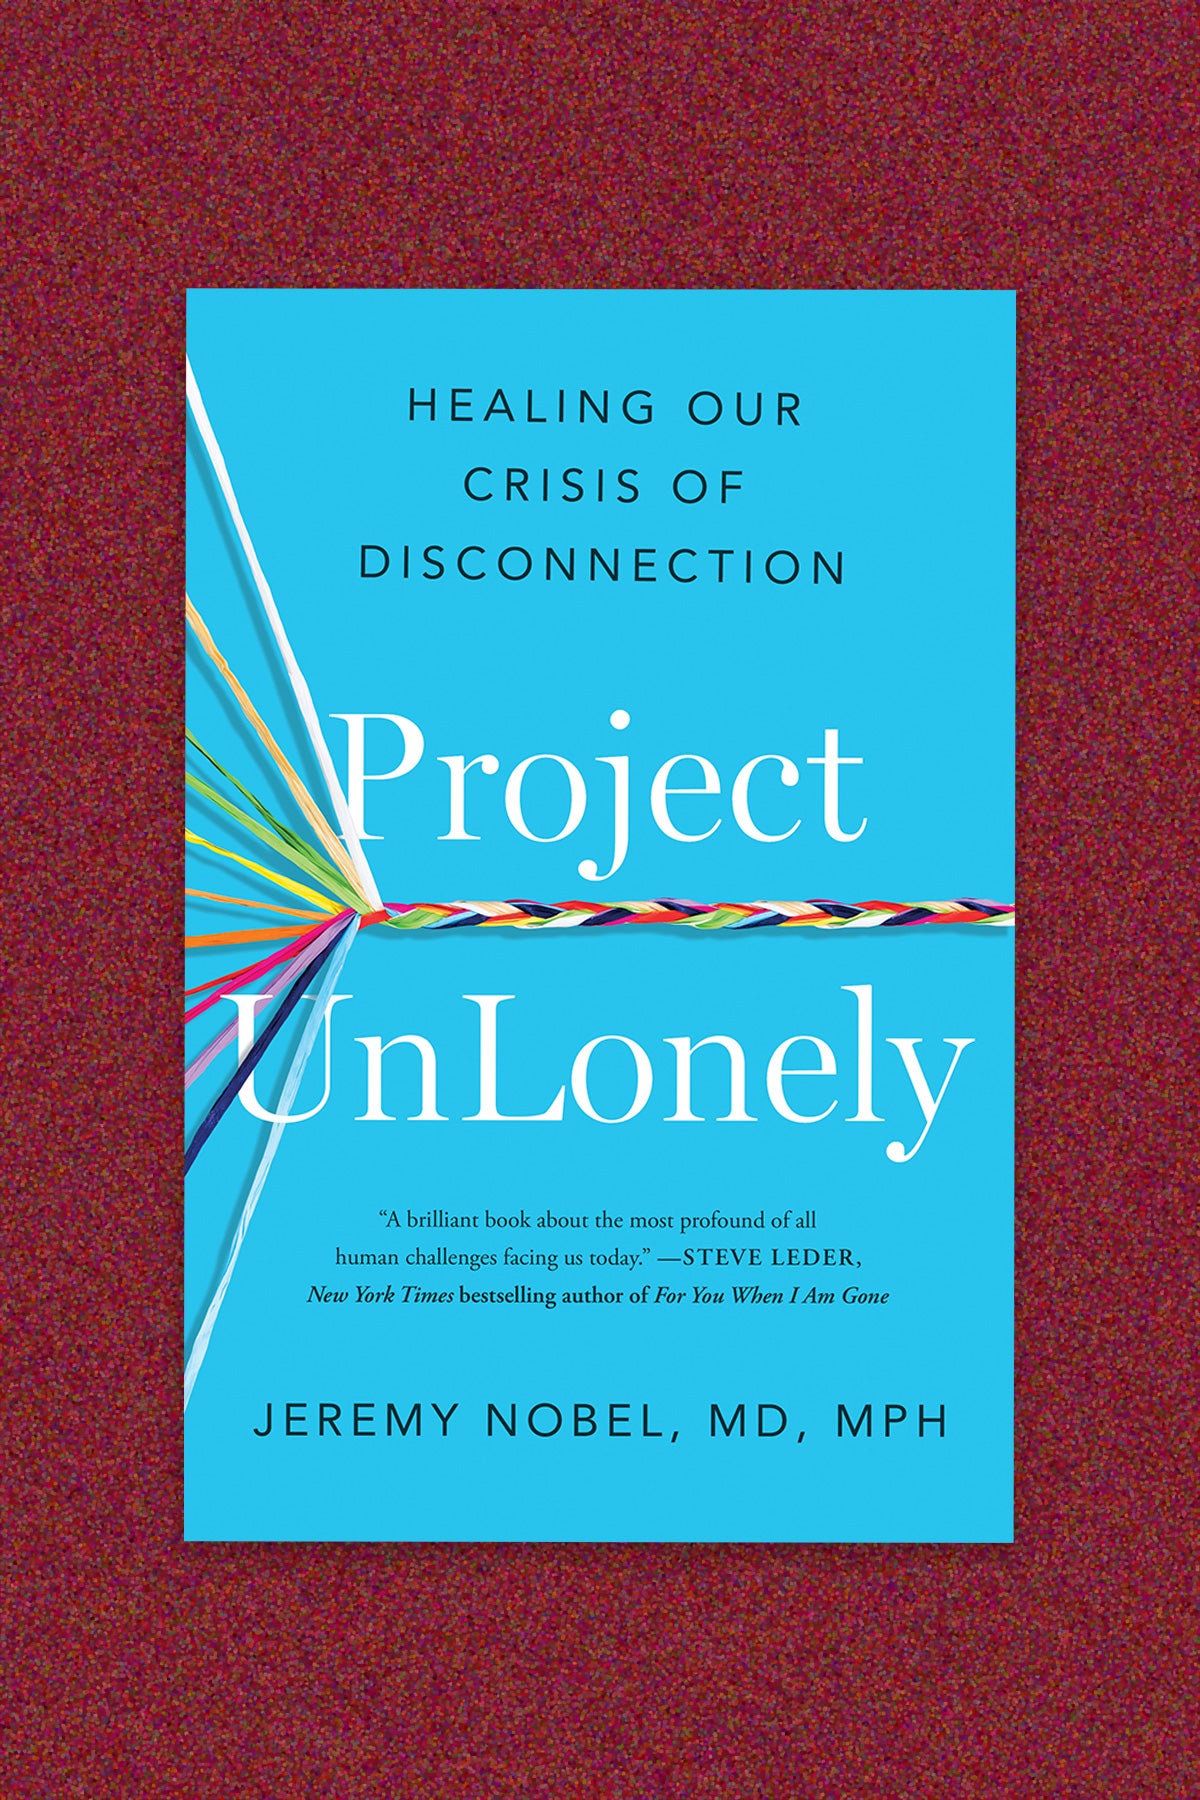 Book cover of “Project UnLonely: Healing our crisis of disconnection” by Jeremy Nobel, MD MPH. The book cover is a bright blue with white serif type for the title and black sans serif for subtitle and author name. Eleven individual colored threads enter from the left side of the cover and converge in a braided line that intersects the title in the middle of the cover. The book cover is on a deep red background.